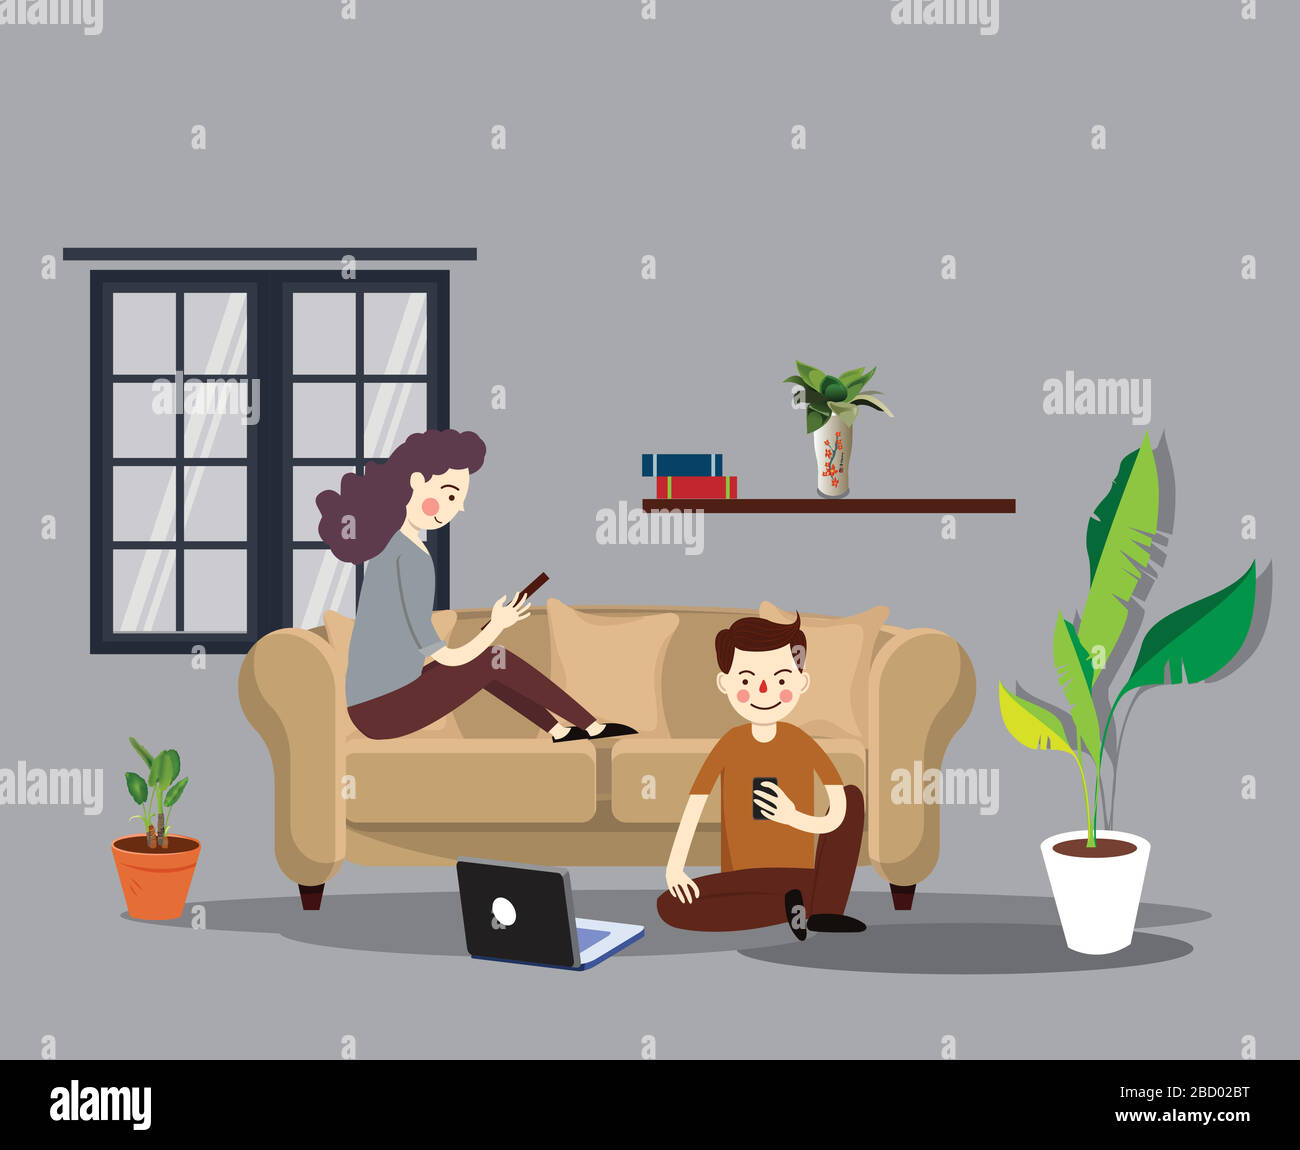 Work from home. Husband and wife working from home together. Stock Vector